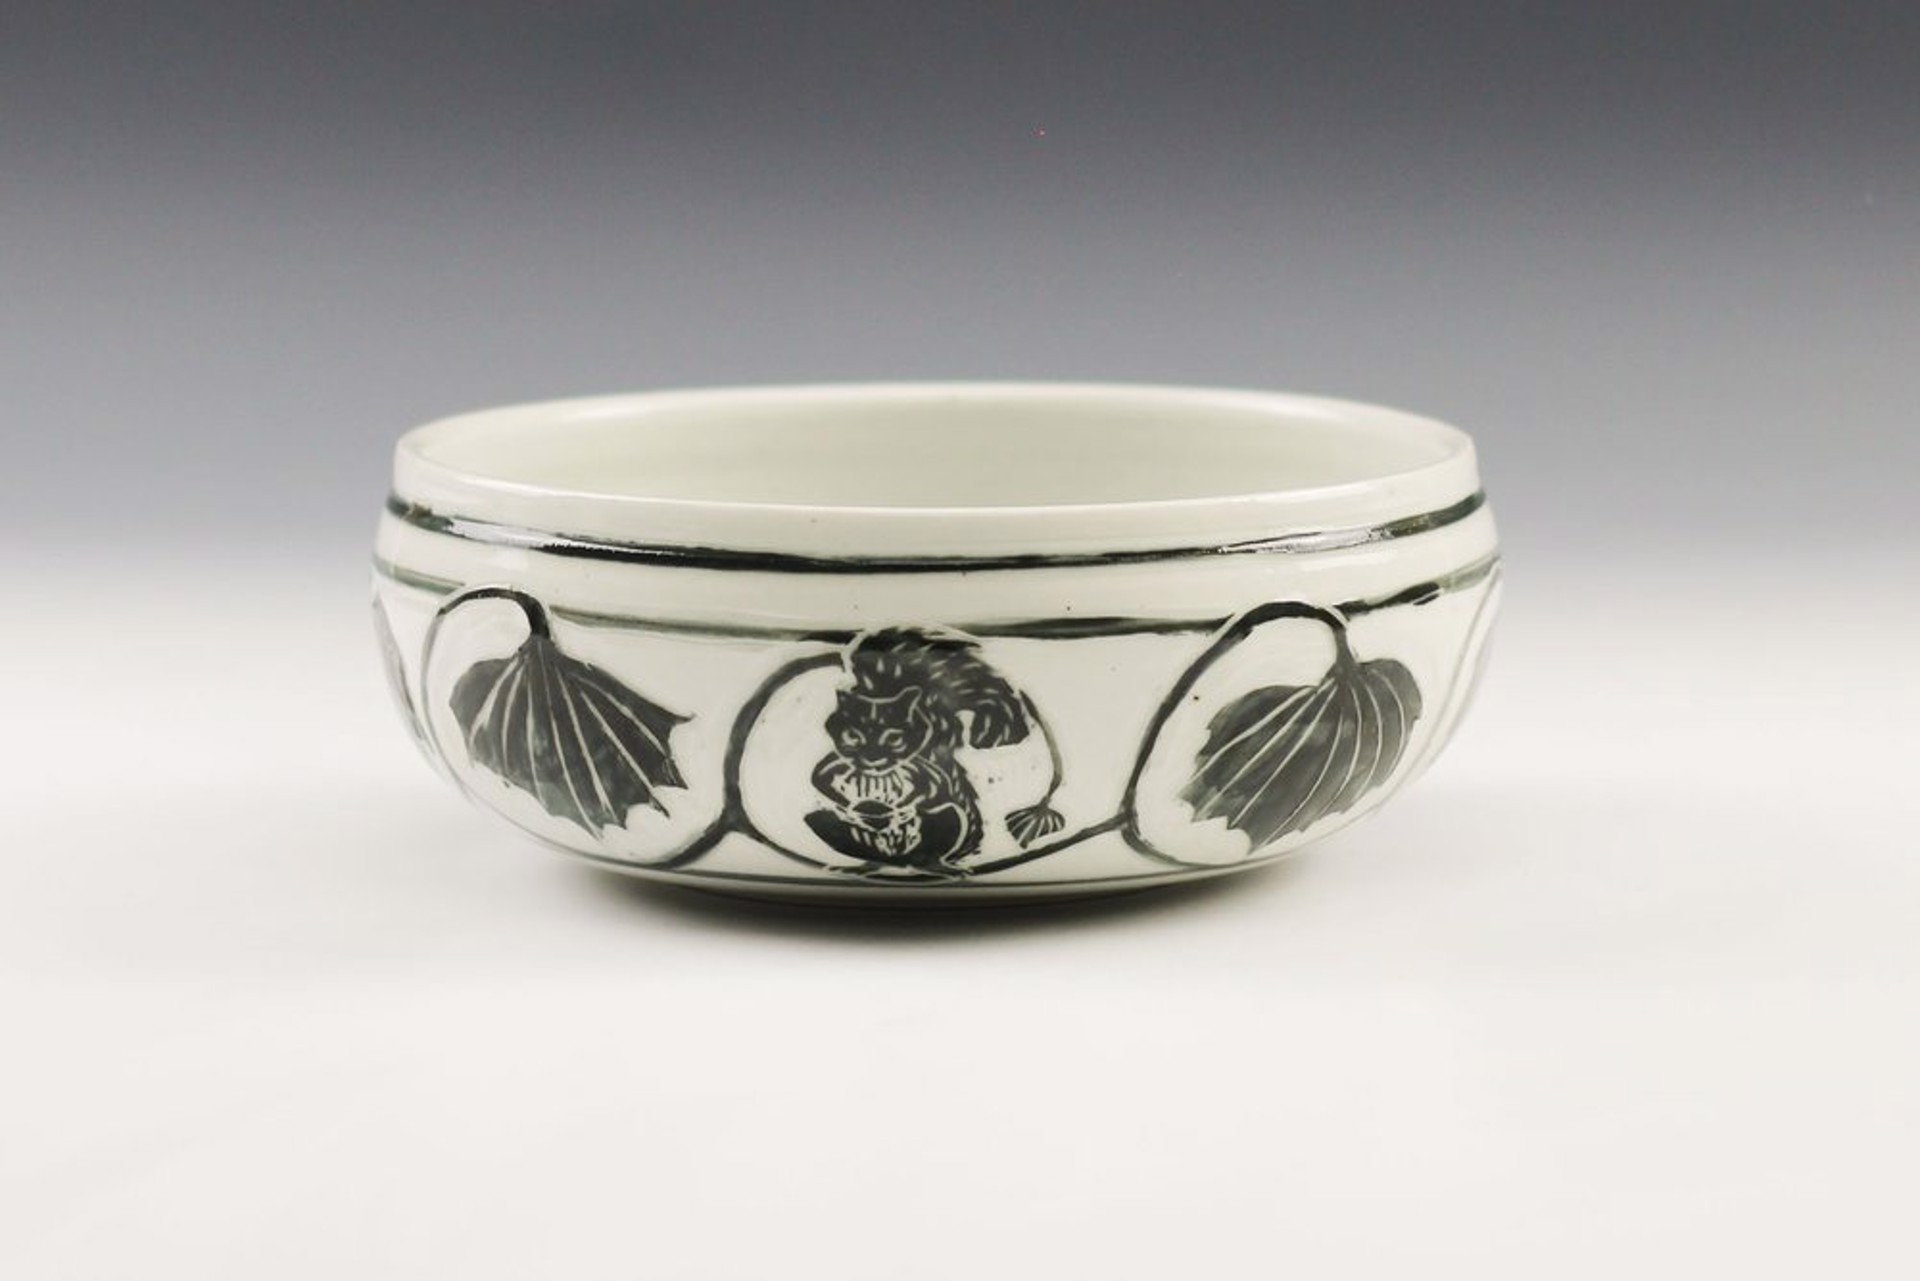 Squirrels and Leaves Serving Bowl by Glynnis Lessing